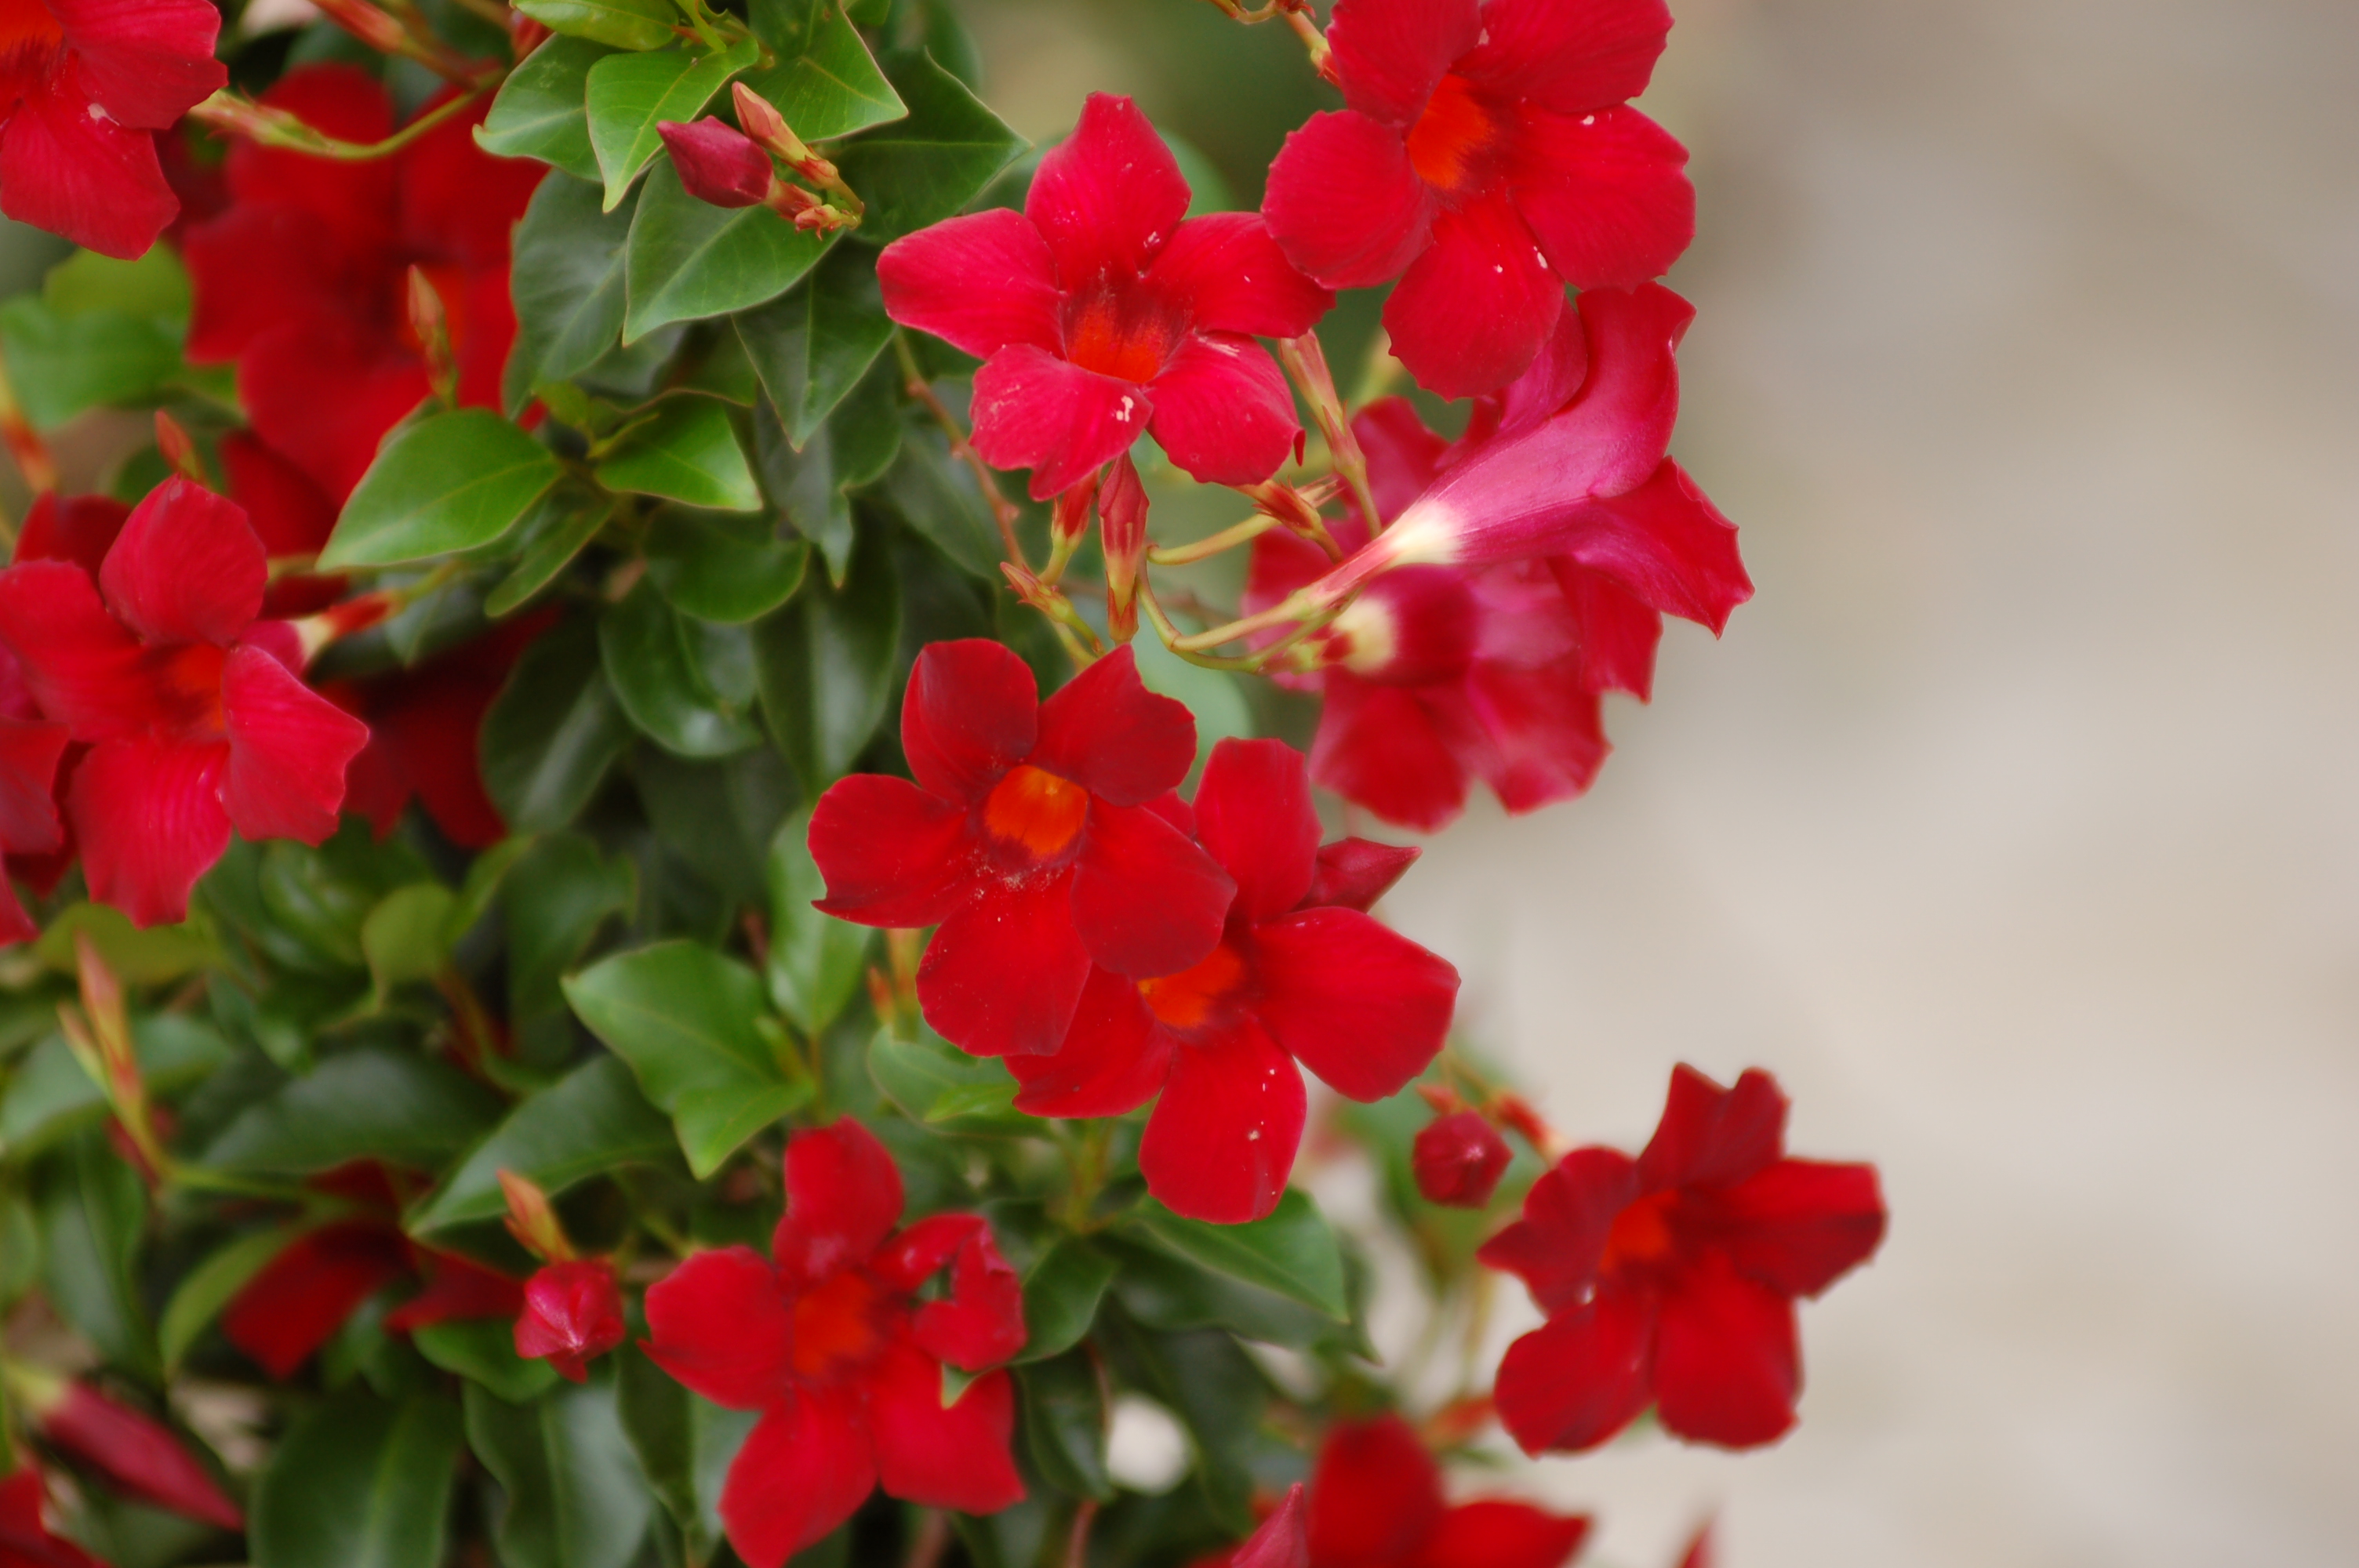 Sun Parasol Pretty Deep Red looks great in urns, baskets, and window boxes.